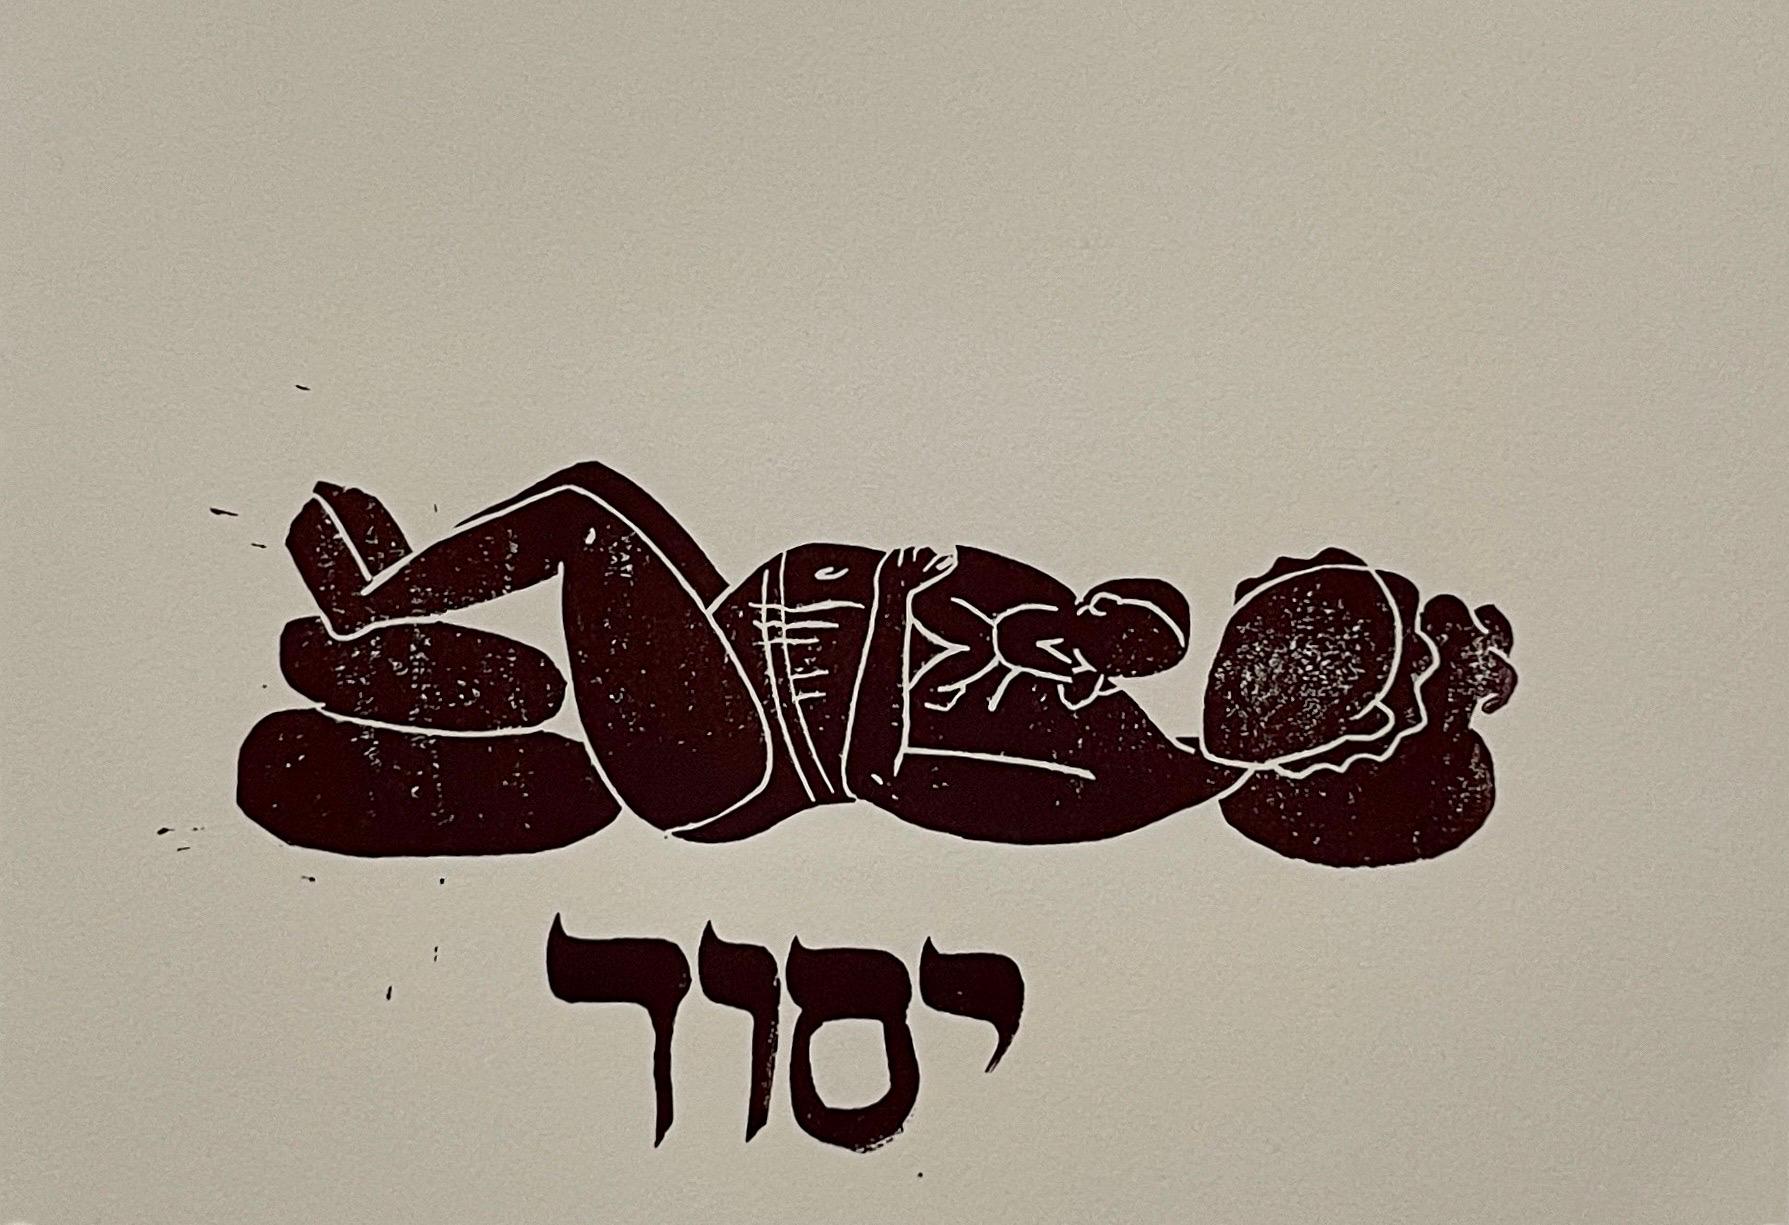 Basya Wuensch
Sefirot, Yesod (Foundation)
Mother and Baby
2023
Hand printed color linocut on cold pressed watercolor paper
Hand signed and numbered
12 X 9 inches

Basya Wuensch Reiter is an accomplished contemporary female Chassidic artist who was